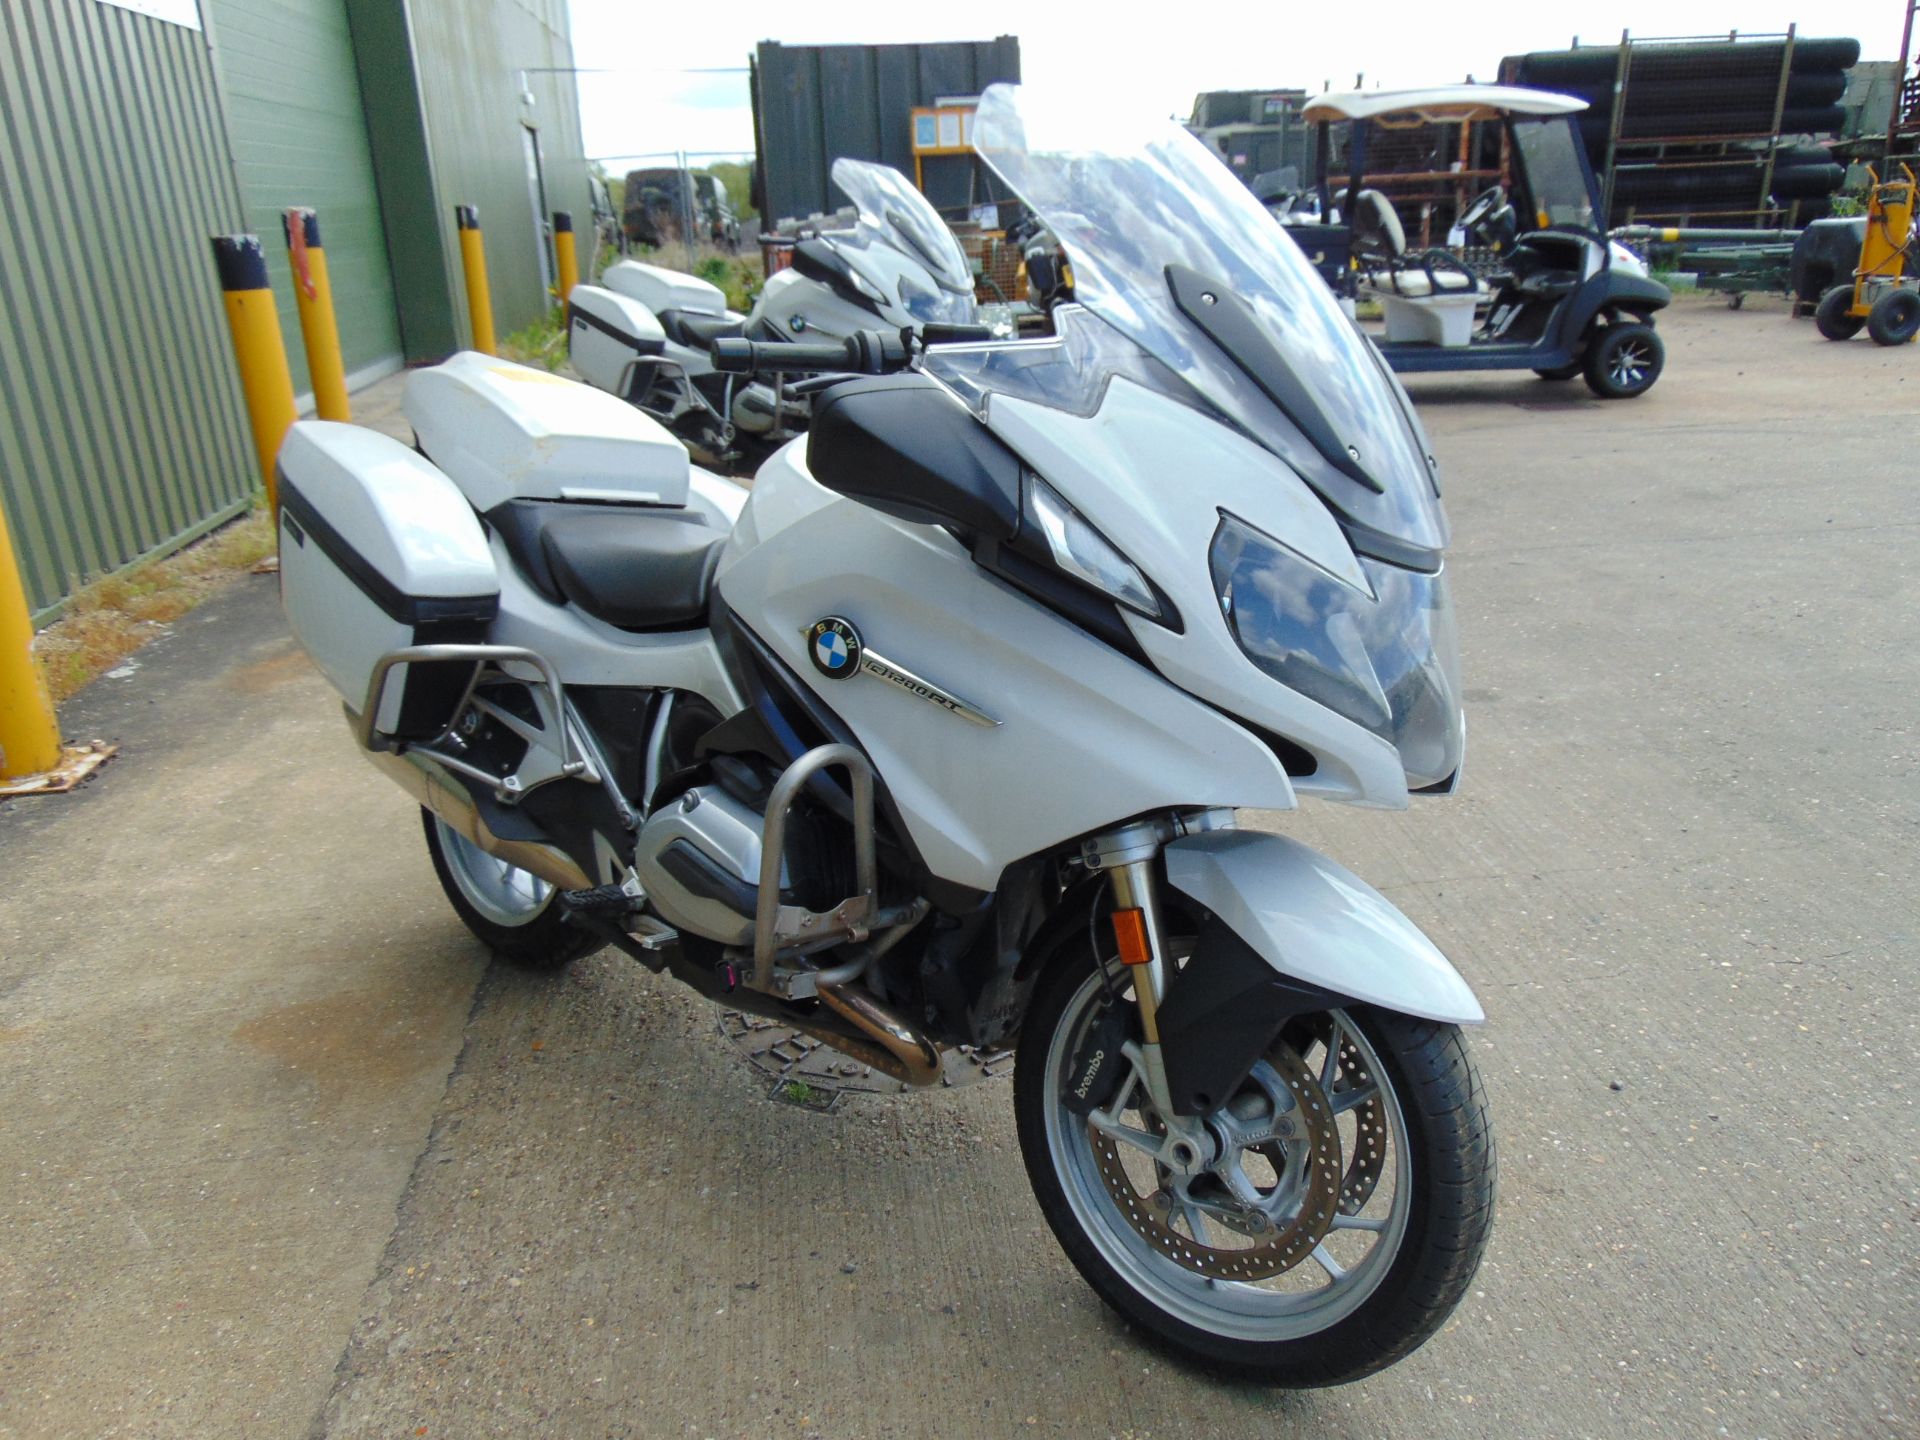 UK Police a 1 Owner 2019 BMW R1200RT Motorbike - Image 4 of 20